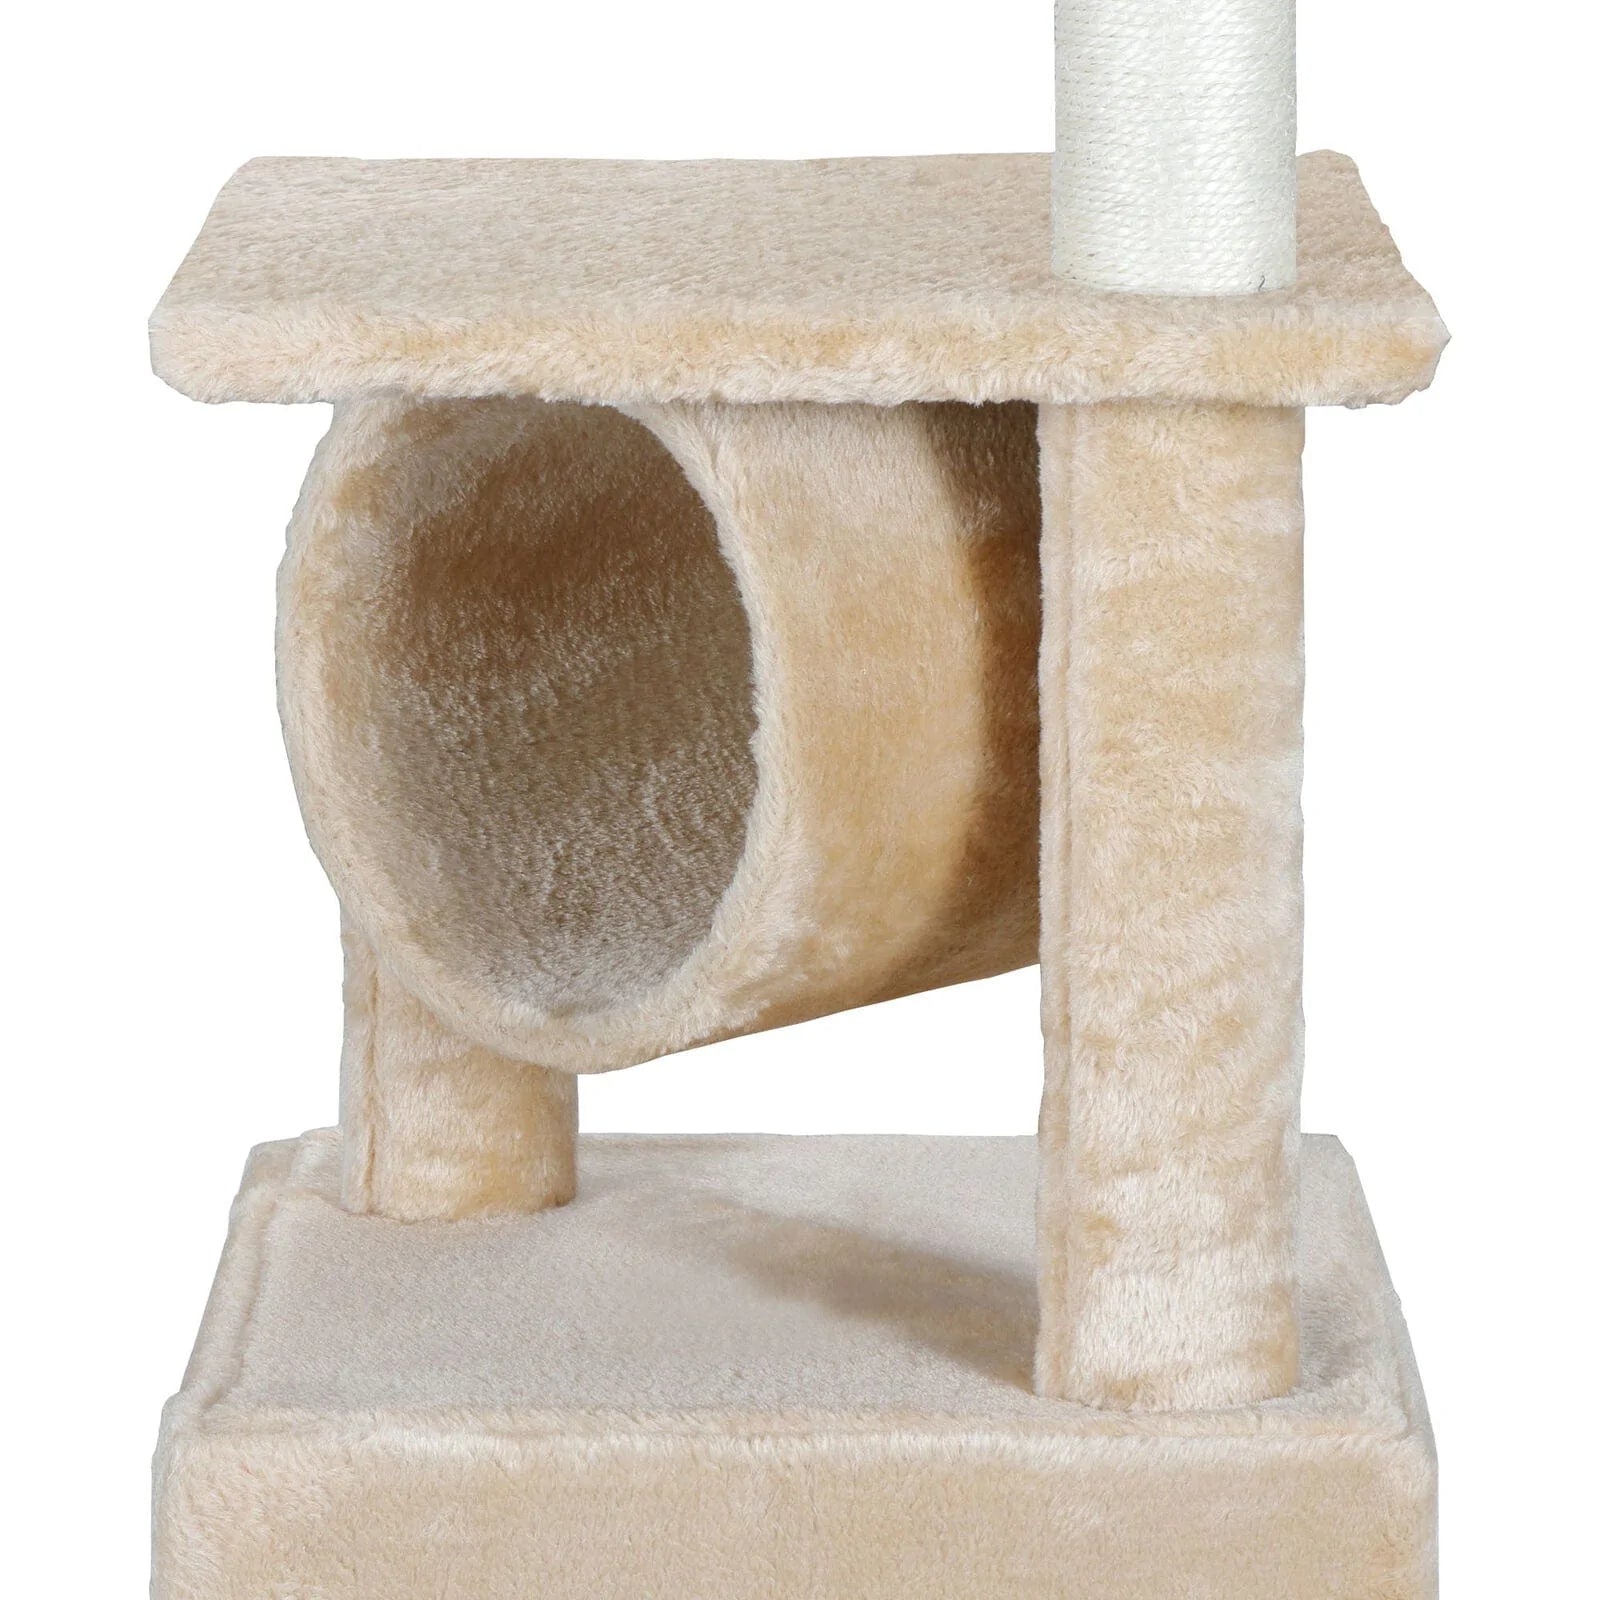 Zenstyle 36" Cat Tree Activity Climber Tower with Plush Perch and Sisal Post for Kittens, Pet Kitty Play House Furniture